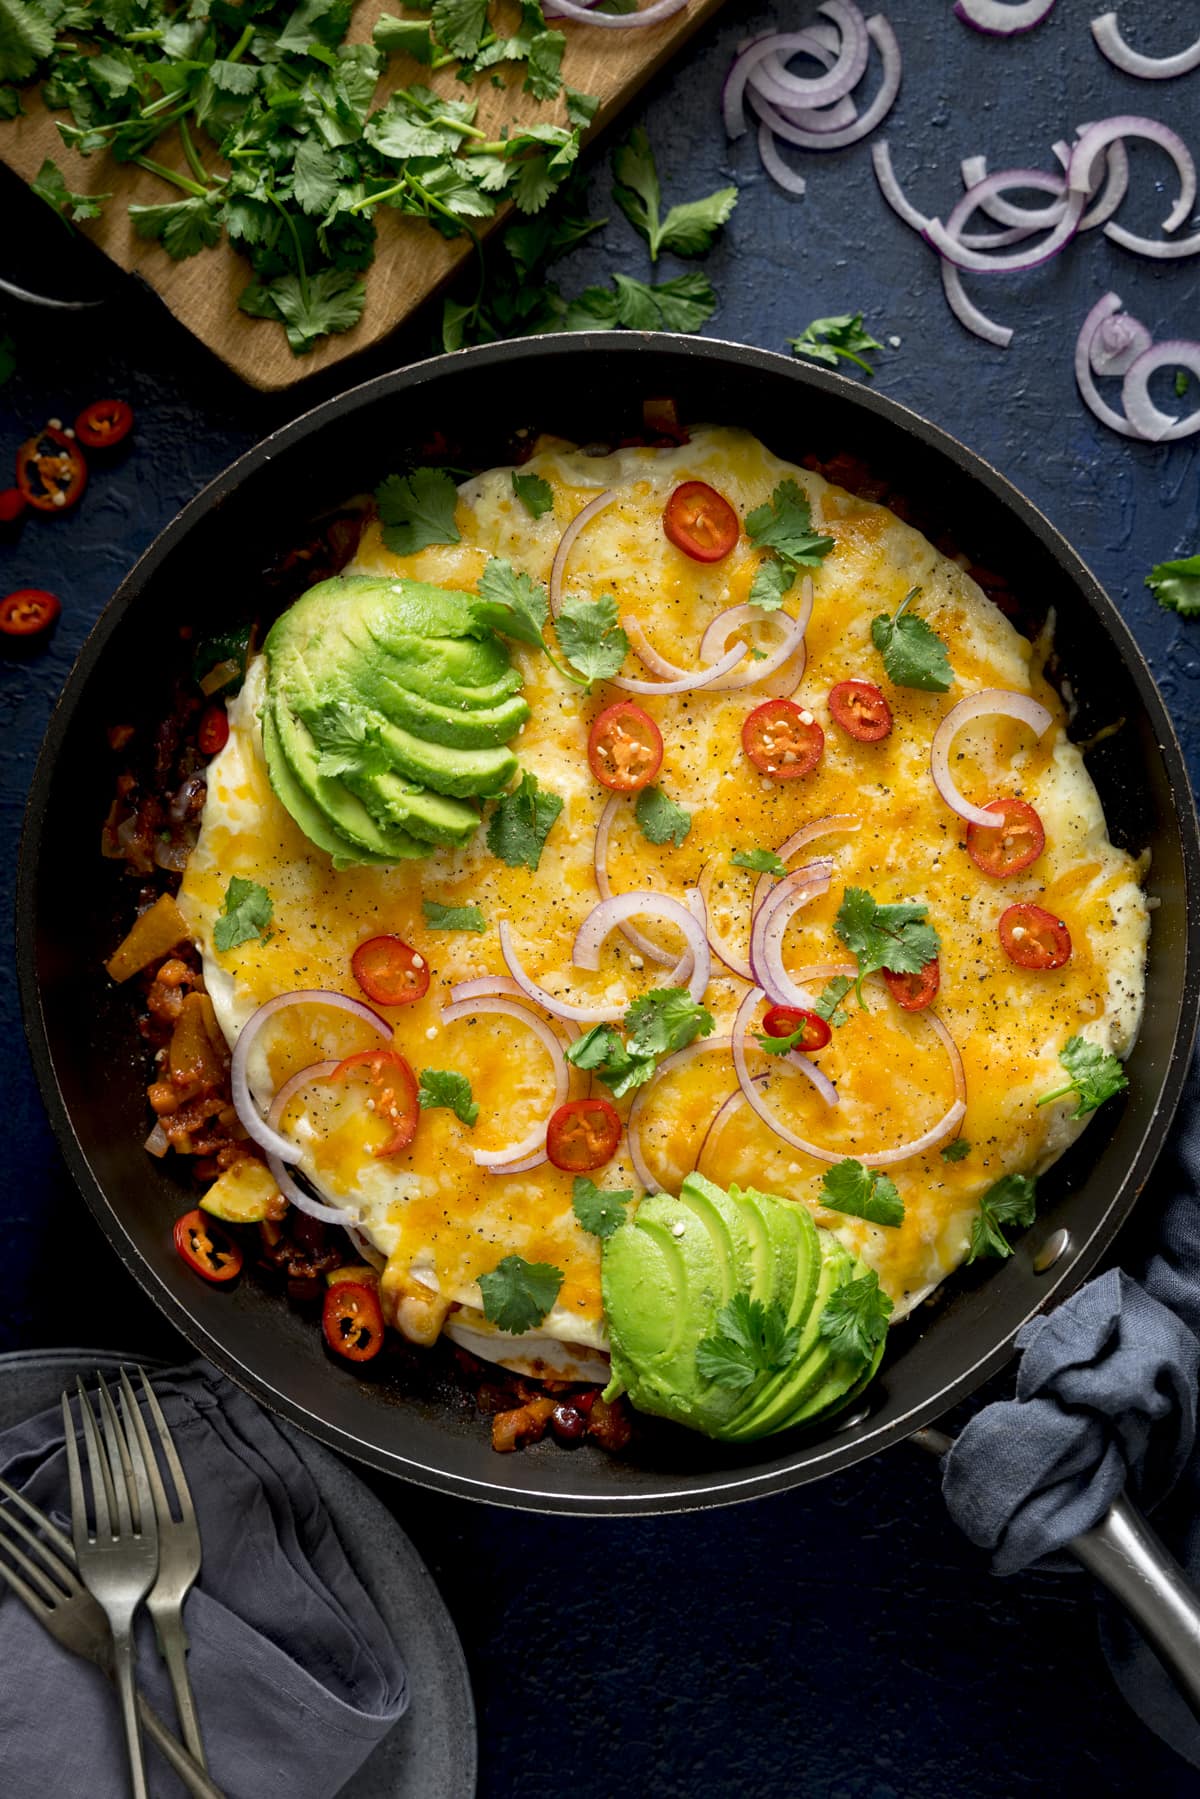 Overhead image of a chorizo, bean and tortilla pan topped with melted cheese, avocado, chillies and red onion. There are ingredients scattered around the pan and the pan is on a dark background.